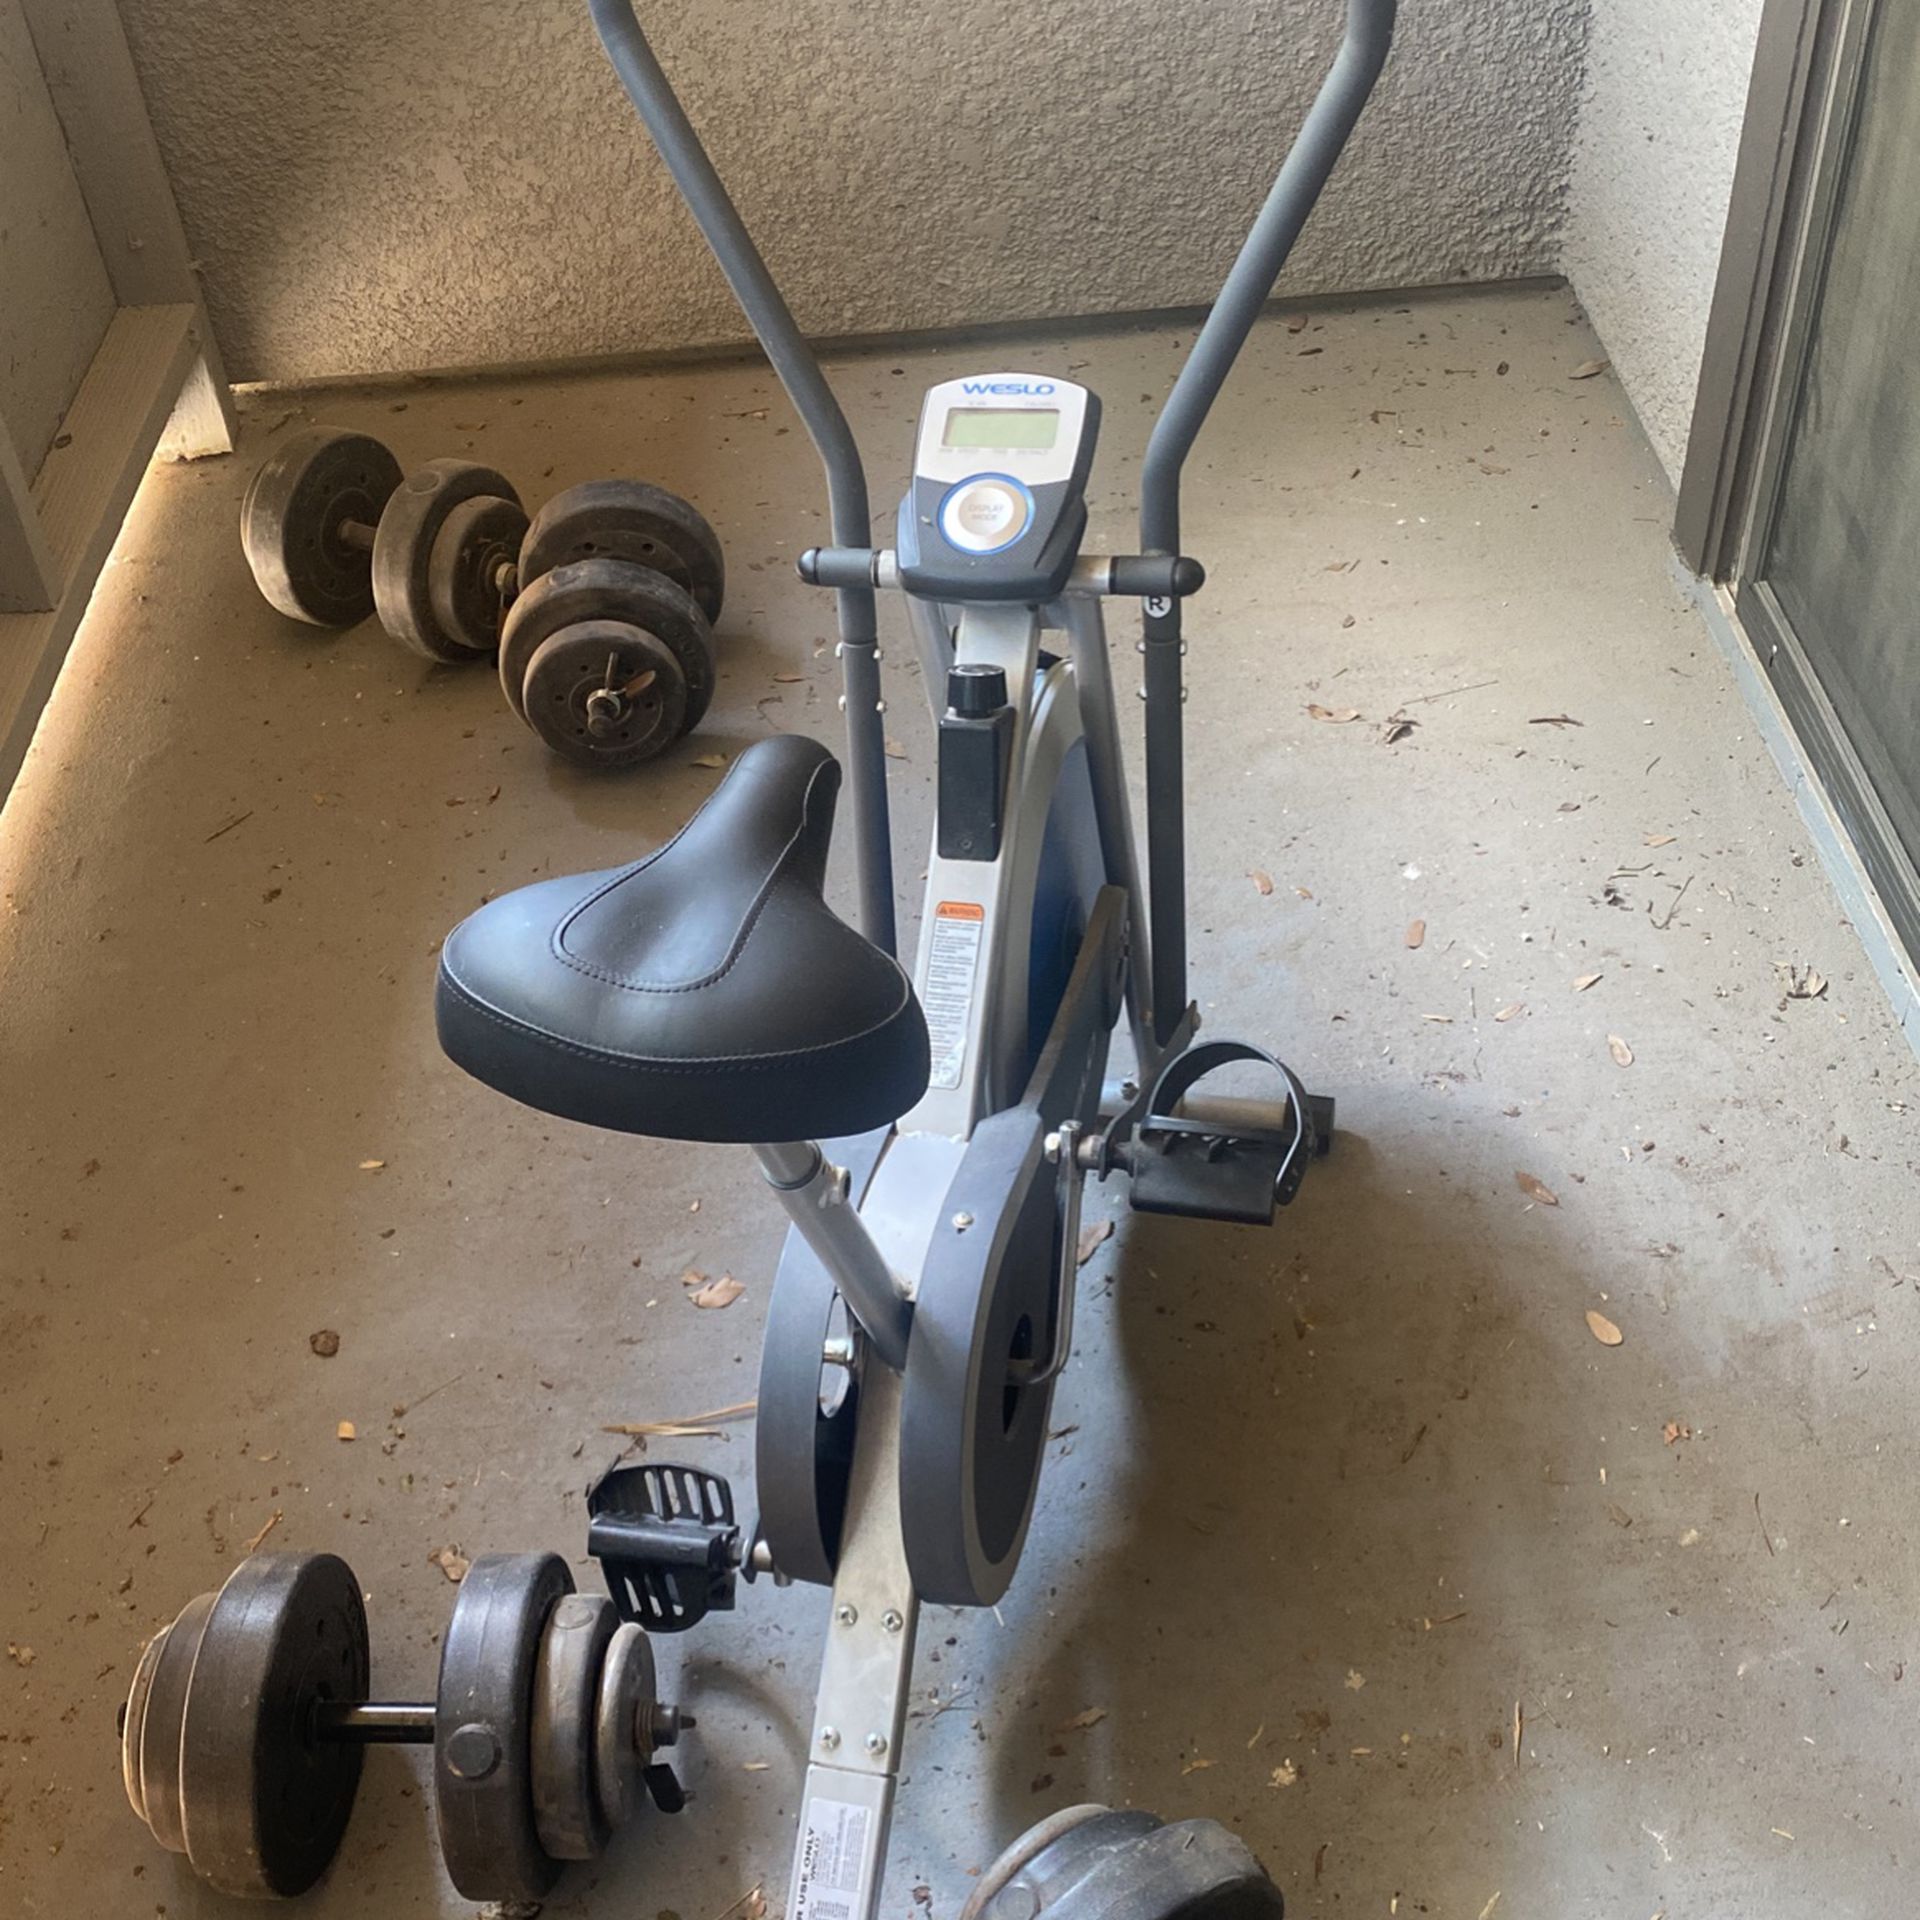 Exercise Bike And Weights 